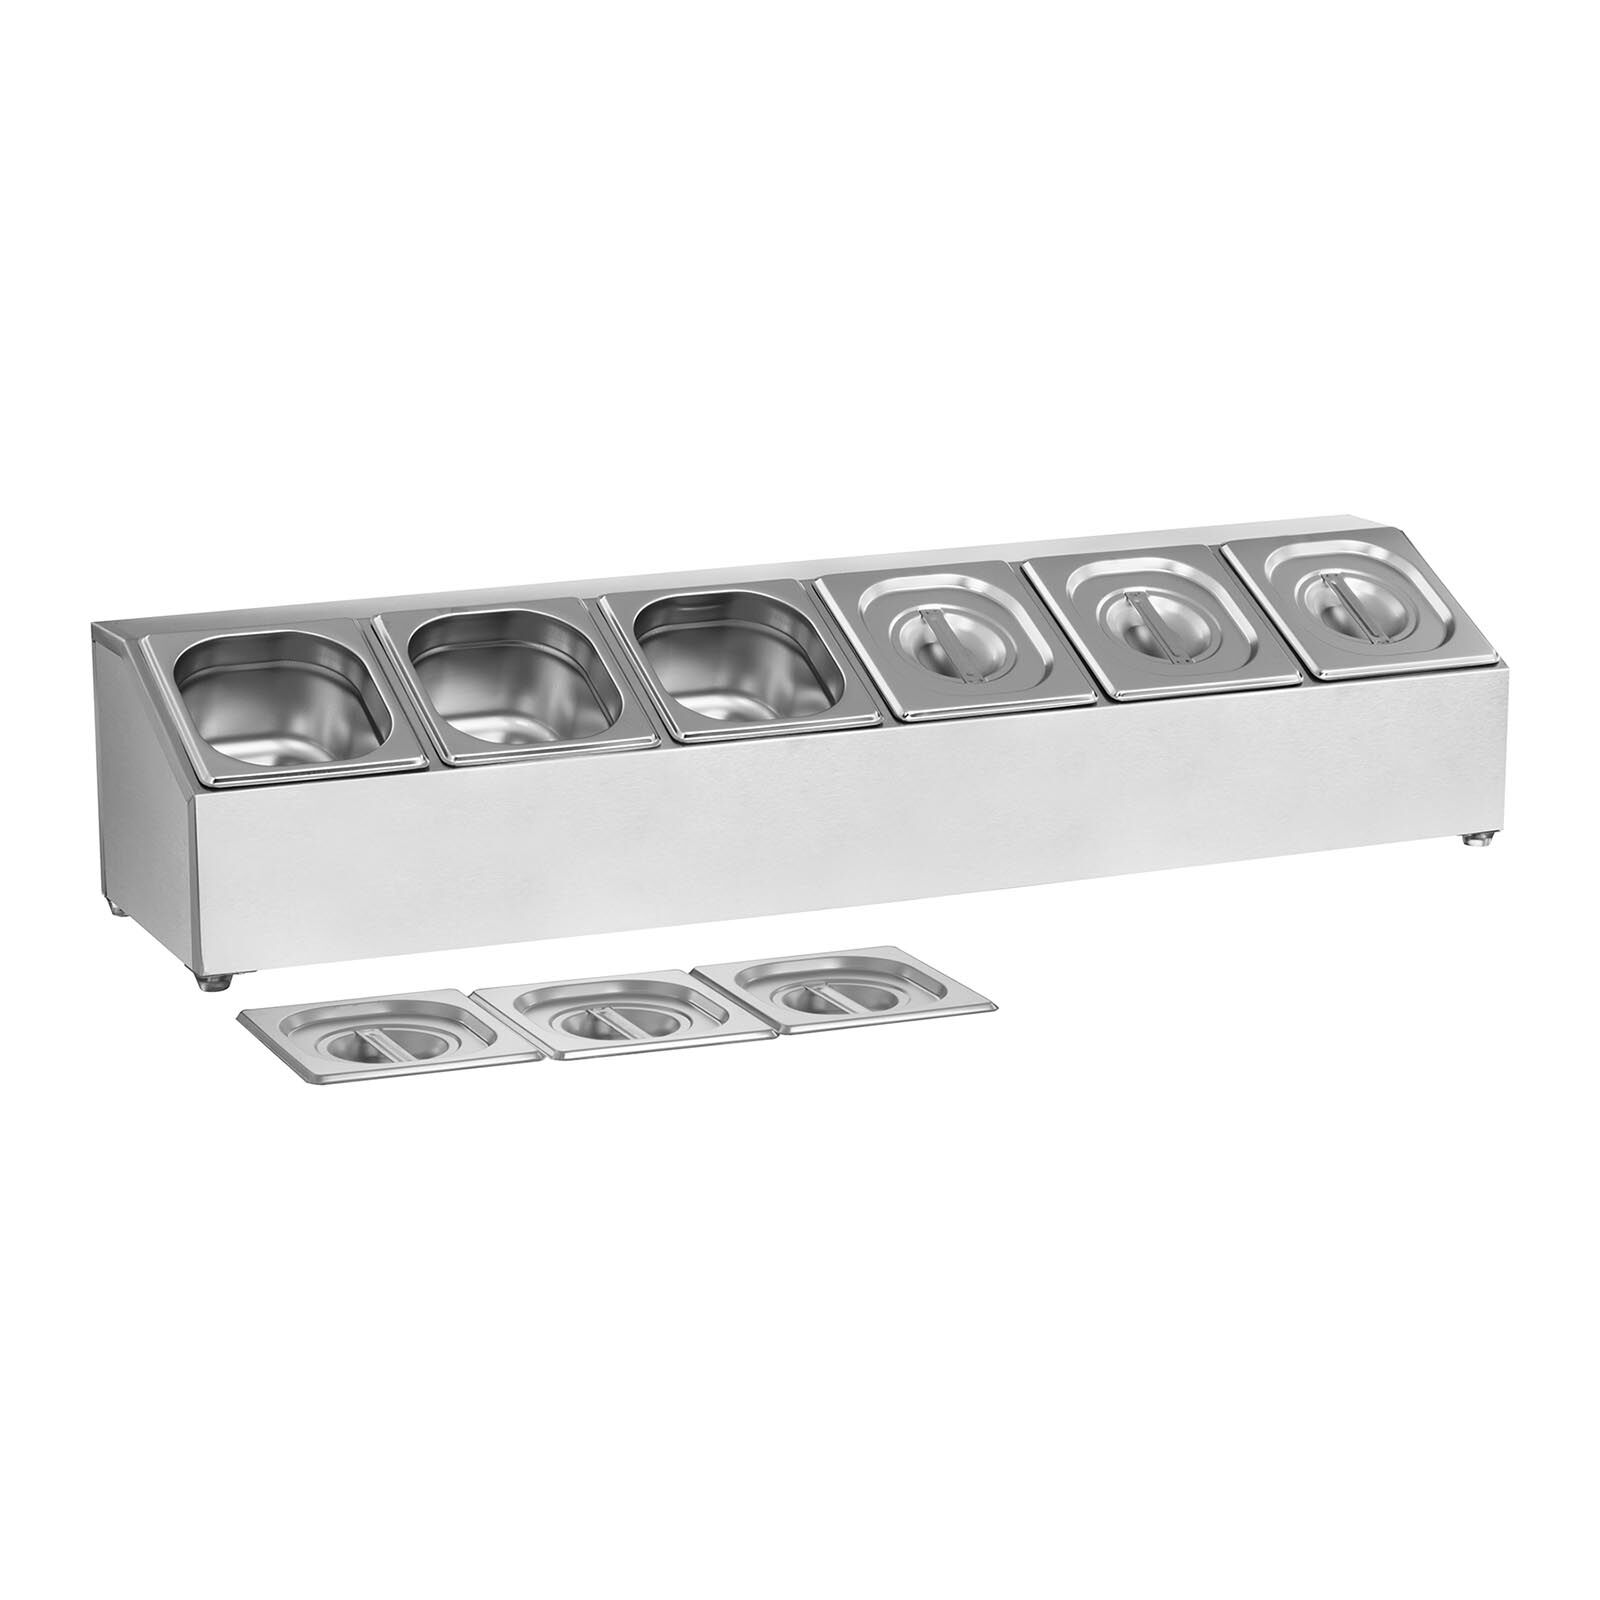 Royal Catering Factory seconds Gastronorm Pan Holder - Incl 6 1/6 Gastronorm Containers with Lids RCPN 6